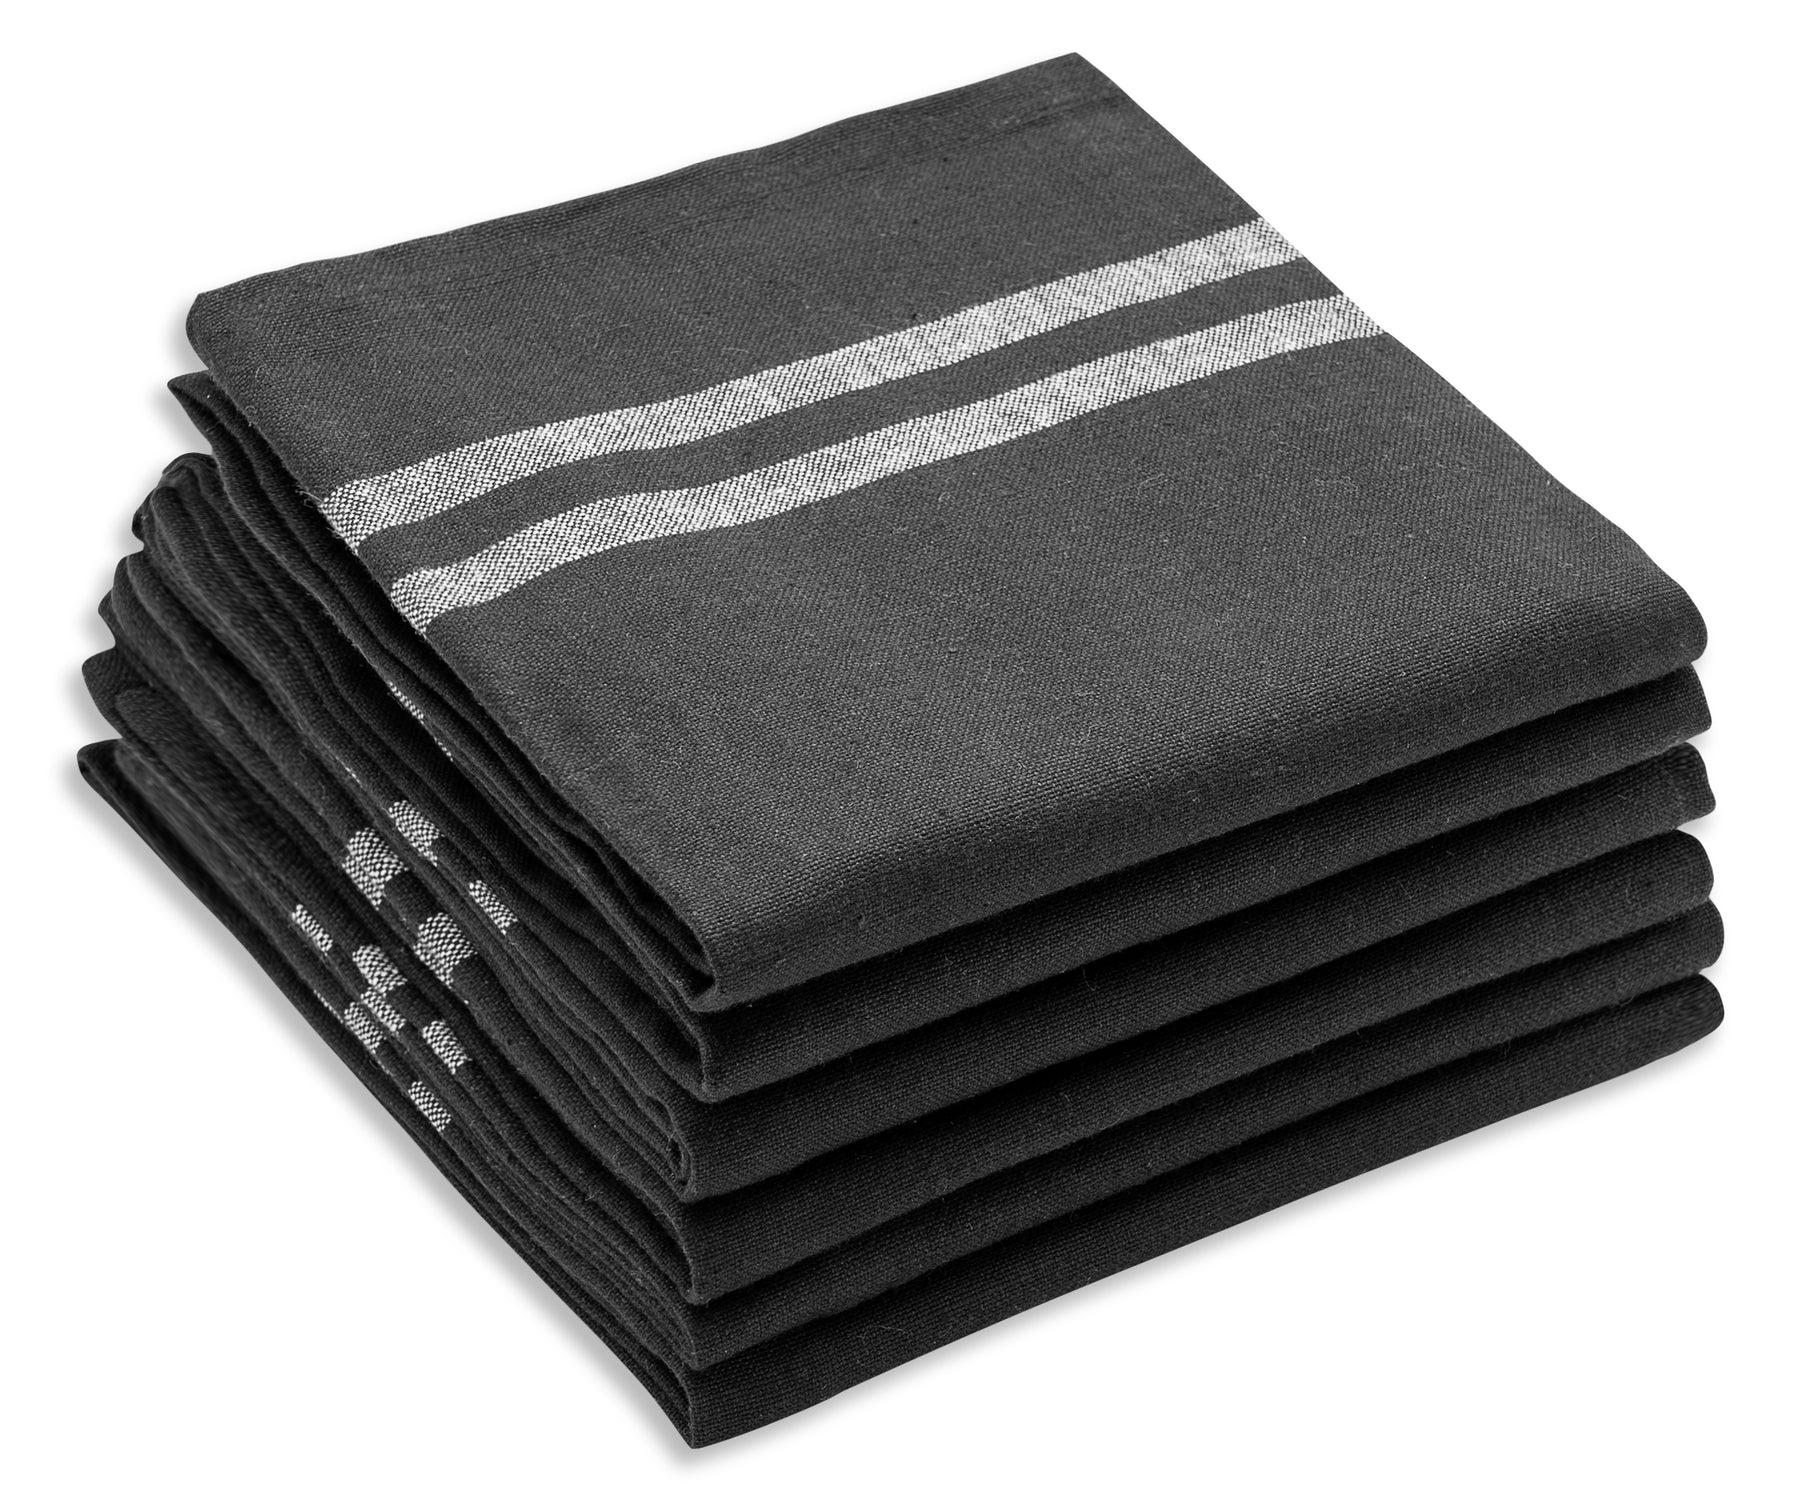 Hand Woven Hache Dish Towel with Dish Cloth | Black & White Stripes with  Black Border